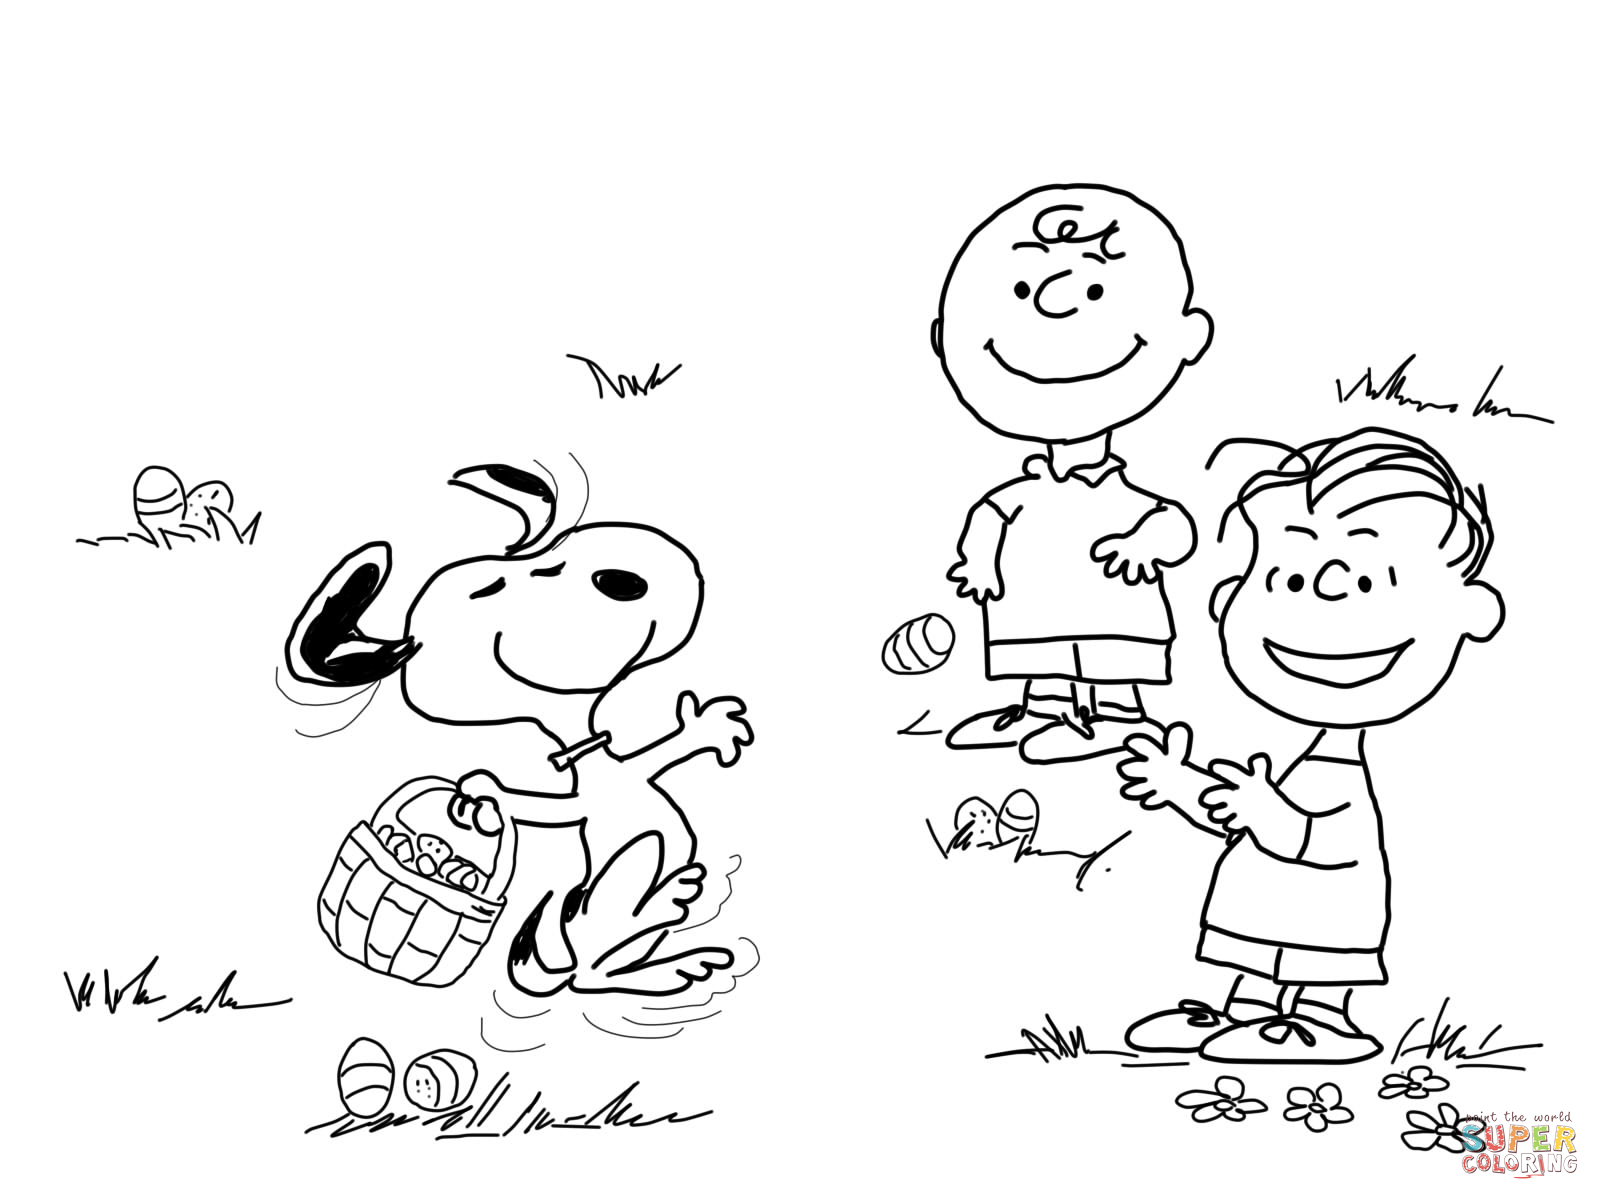 Charlie brown coloring pages to download and print for free